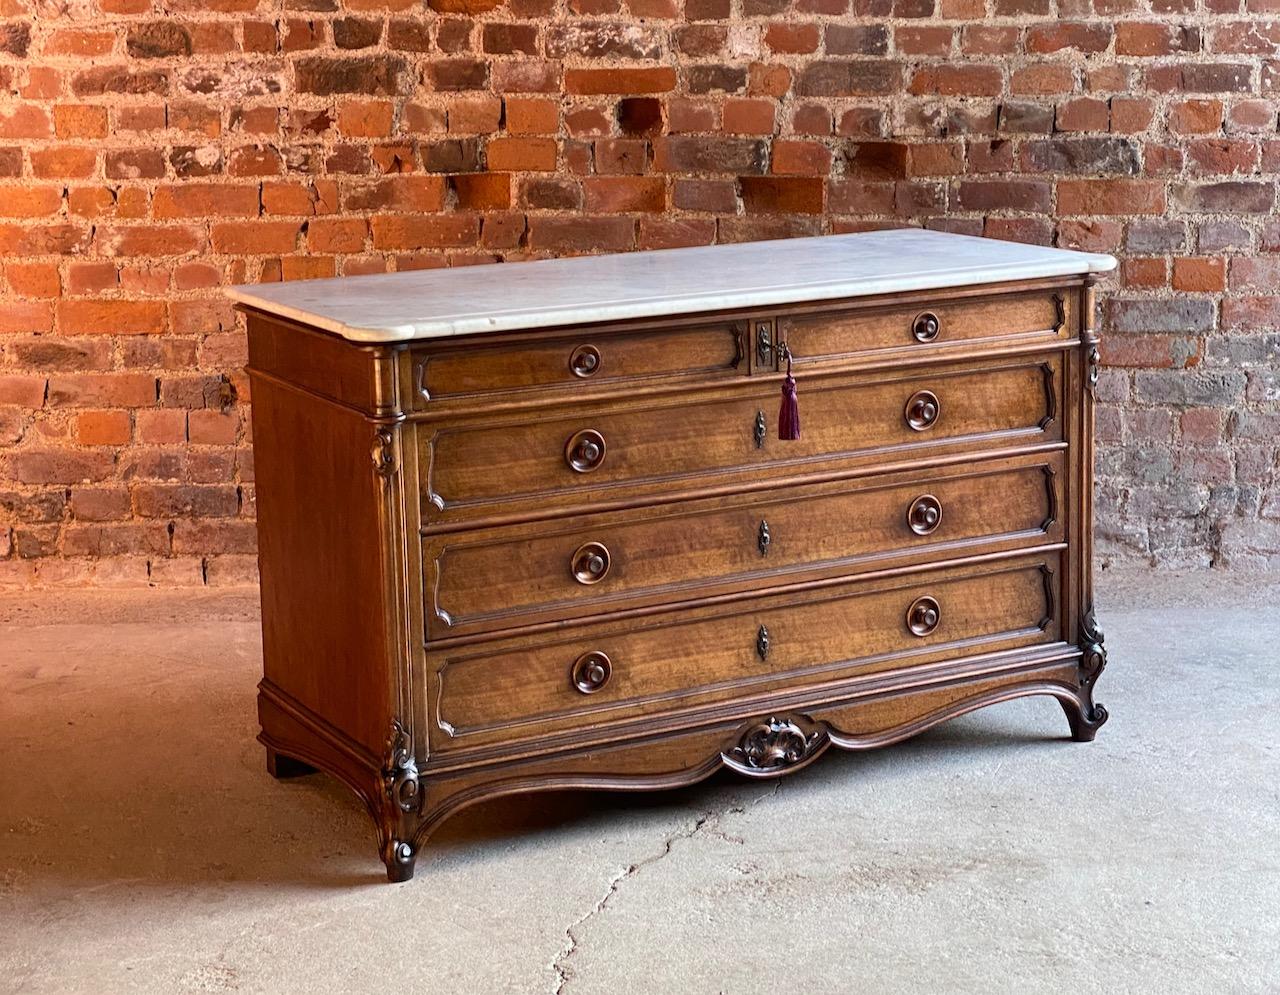 Antique French marble chest of drawers commode France circa 1890 number 14

Beautiful large French antique marble topped oak commode chest of drawers, circa 1890, this chest dates to the late 19th century, the elegant white marble top over two